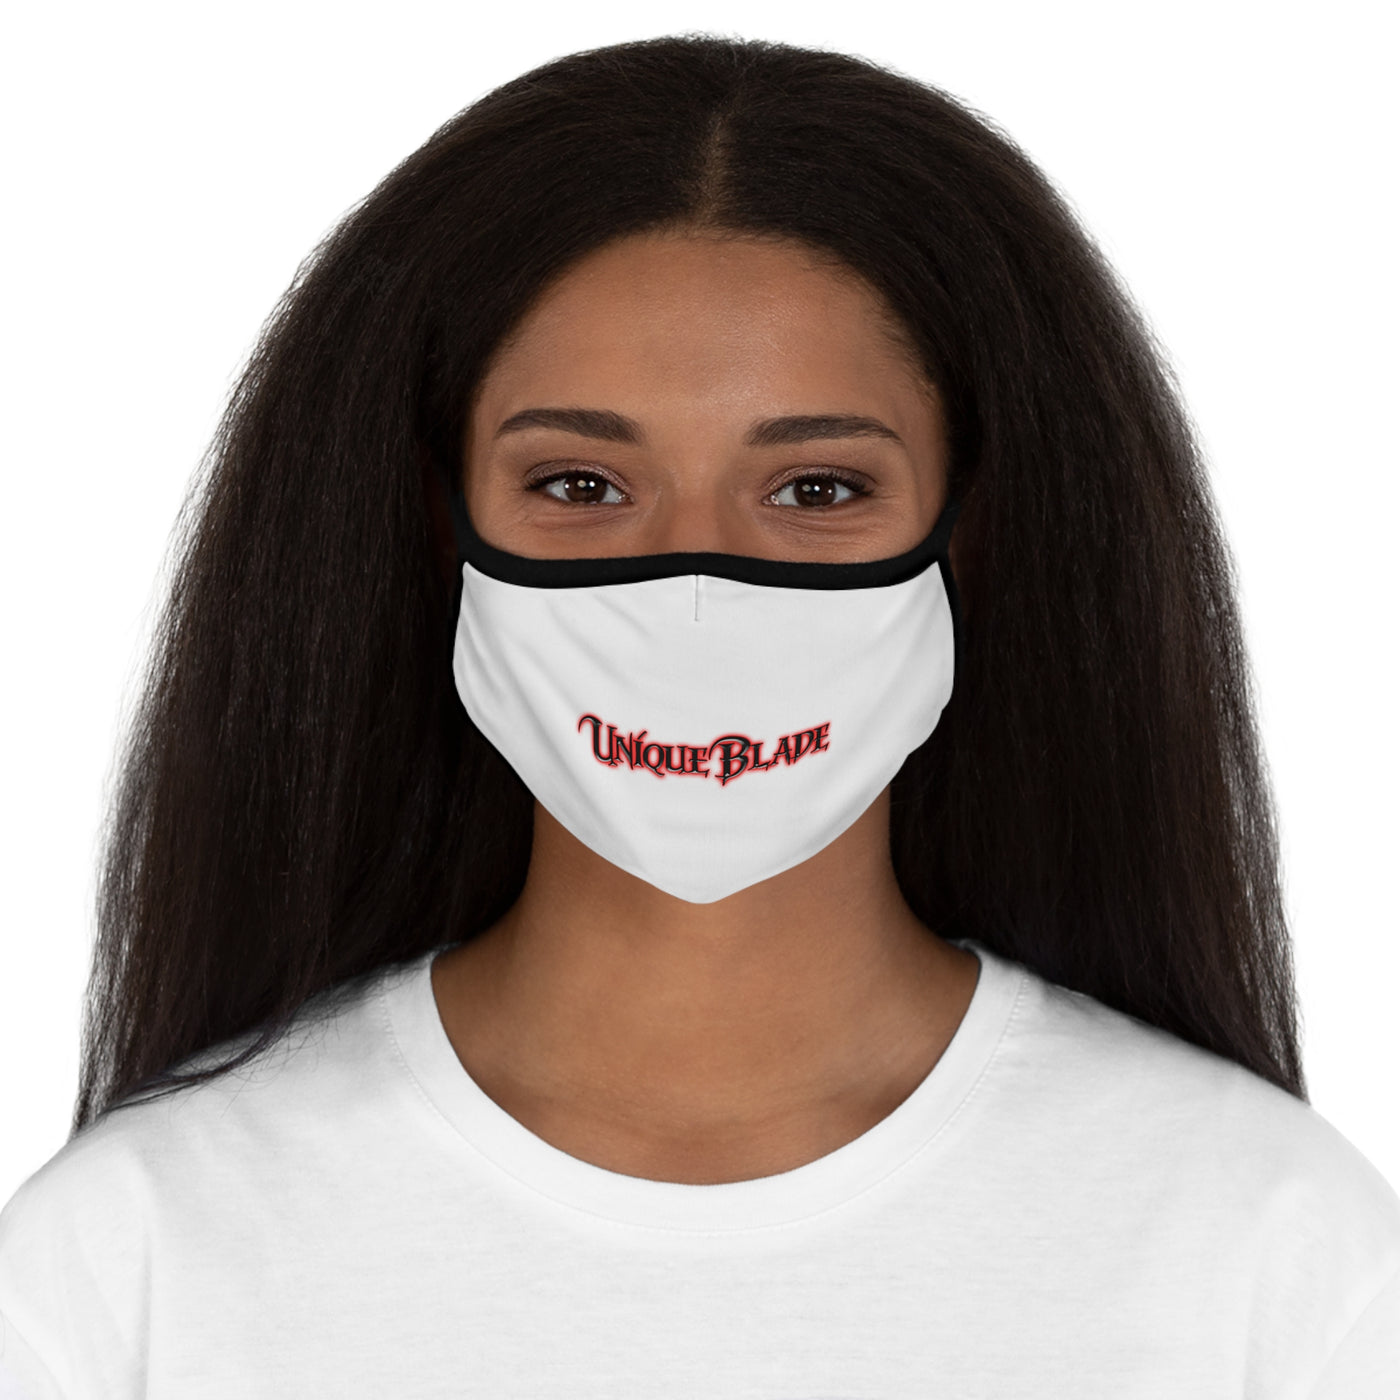 Fitted Polyester Face Mask - Close-fitting and breathable face mask made of polyester material, providing comfortable and protective coverage for everyday use.